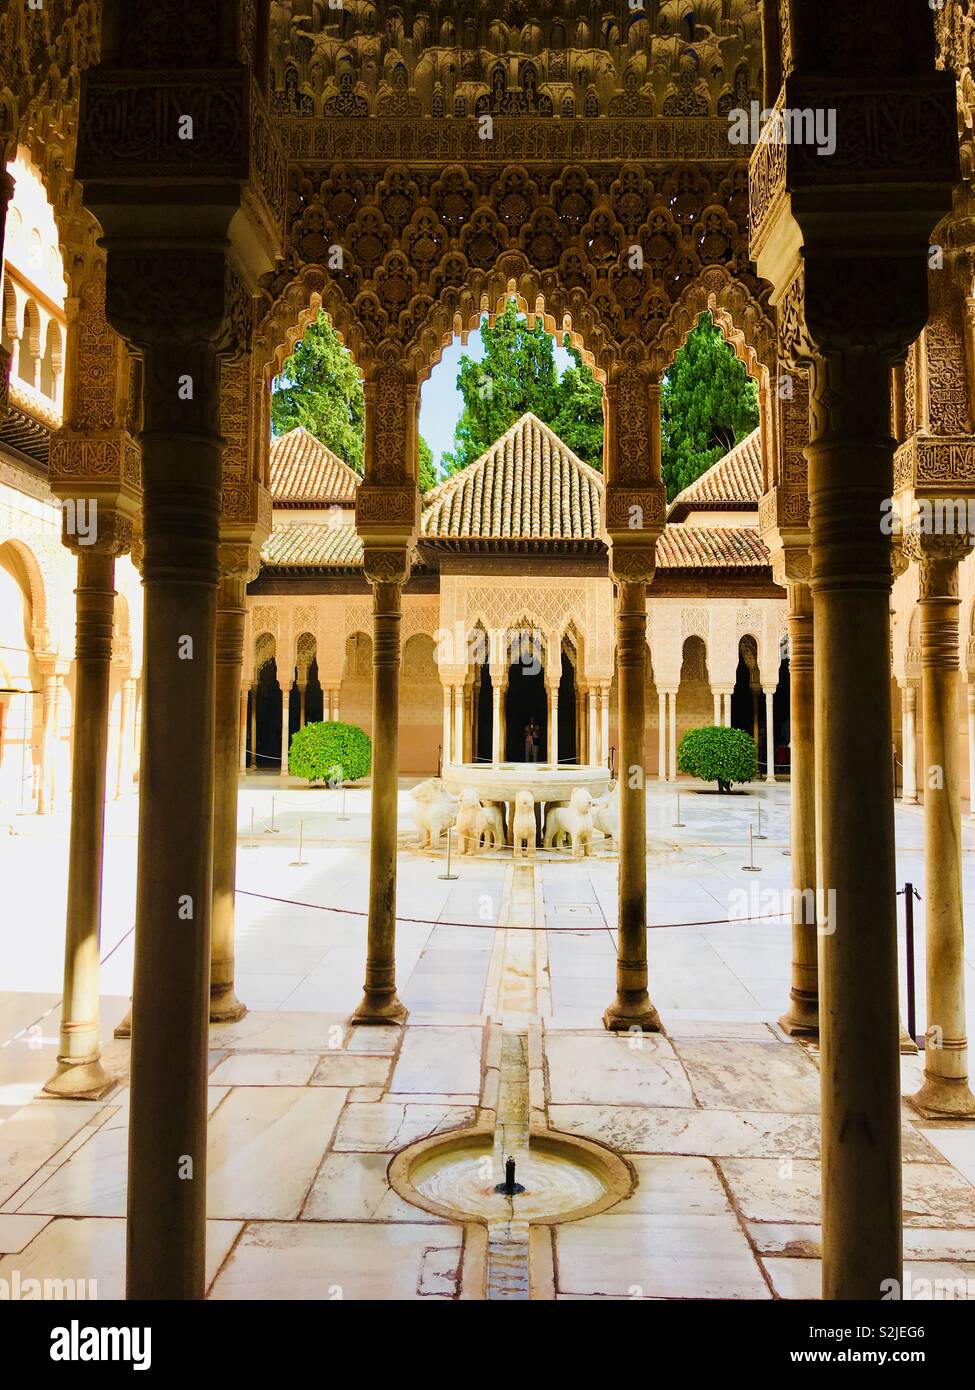 Internal courtyard at the La Alhambra Palace in Granada, Spain. Stock Photo